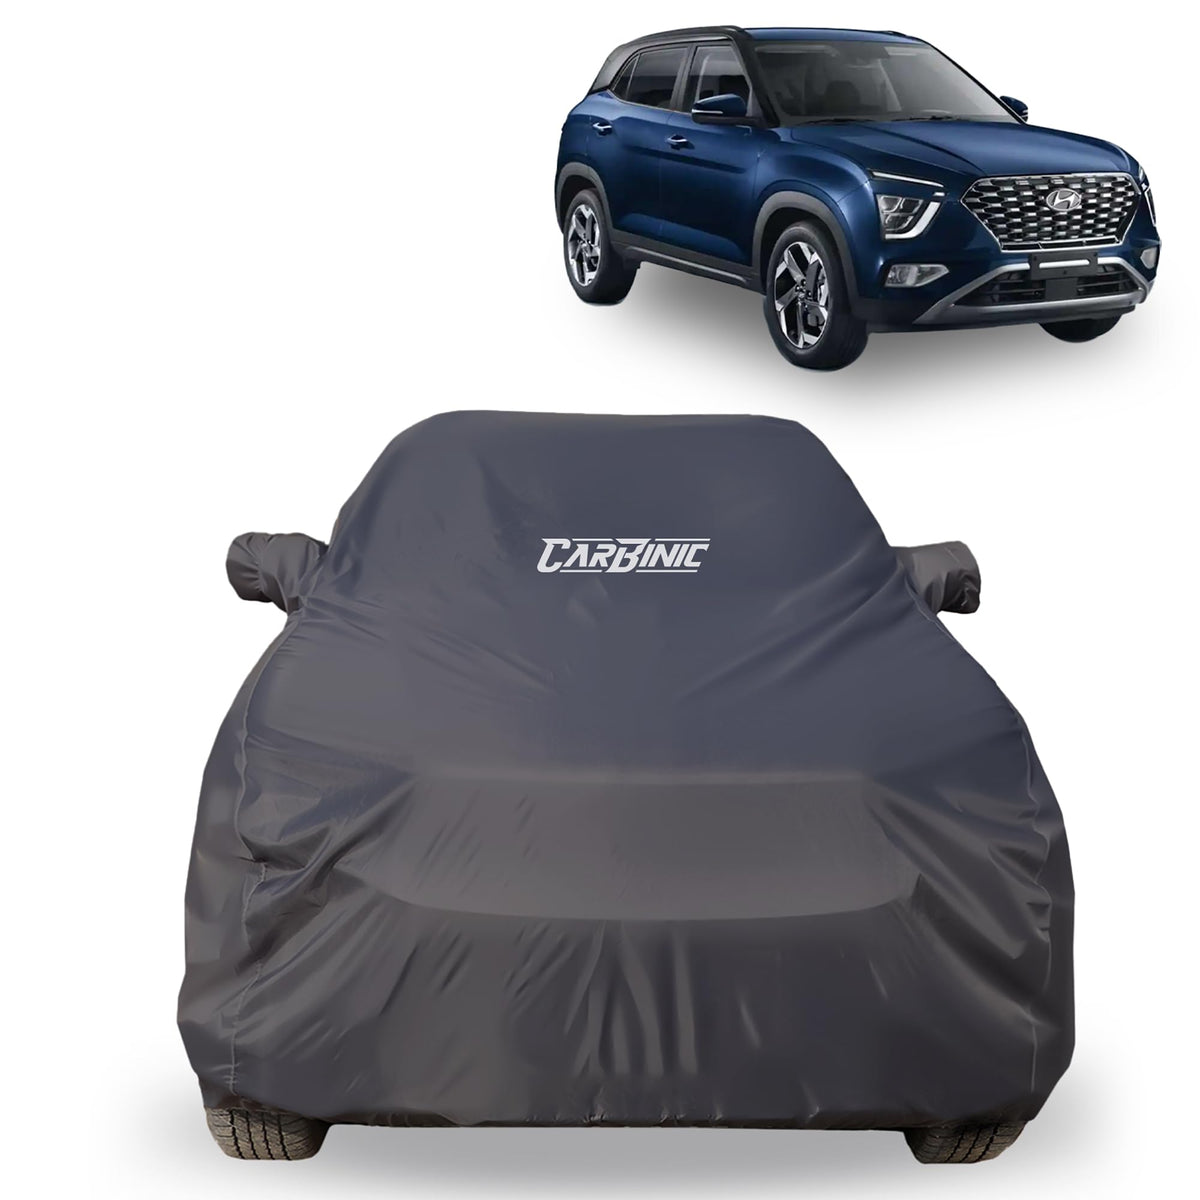 CARBINIC Car Body Cover for MG ZS EV 2022 | Water Resistant, UV Protection Car Cover | Scratchproof Body Shield | All-Weather Cover | Mirror Pocket & Antenna | Car Accessories Dusk Grey